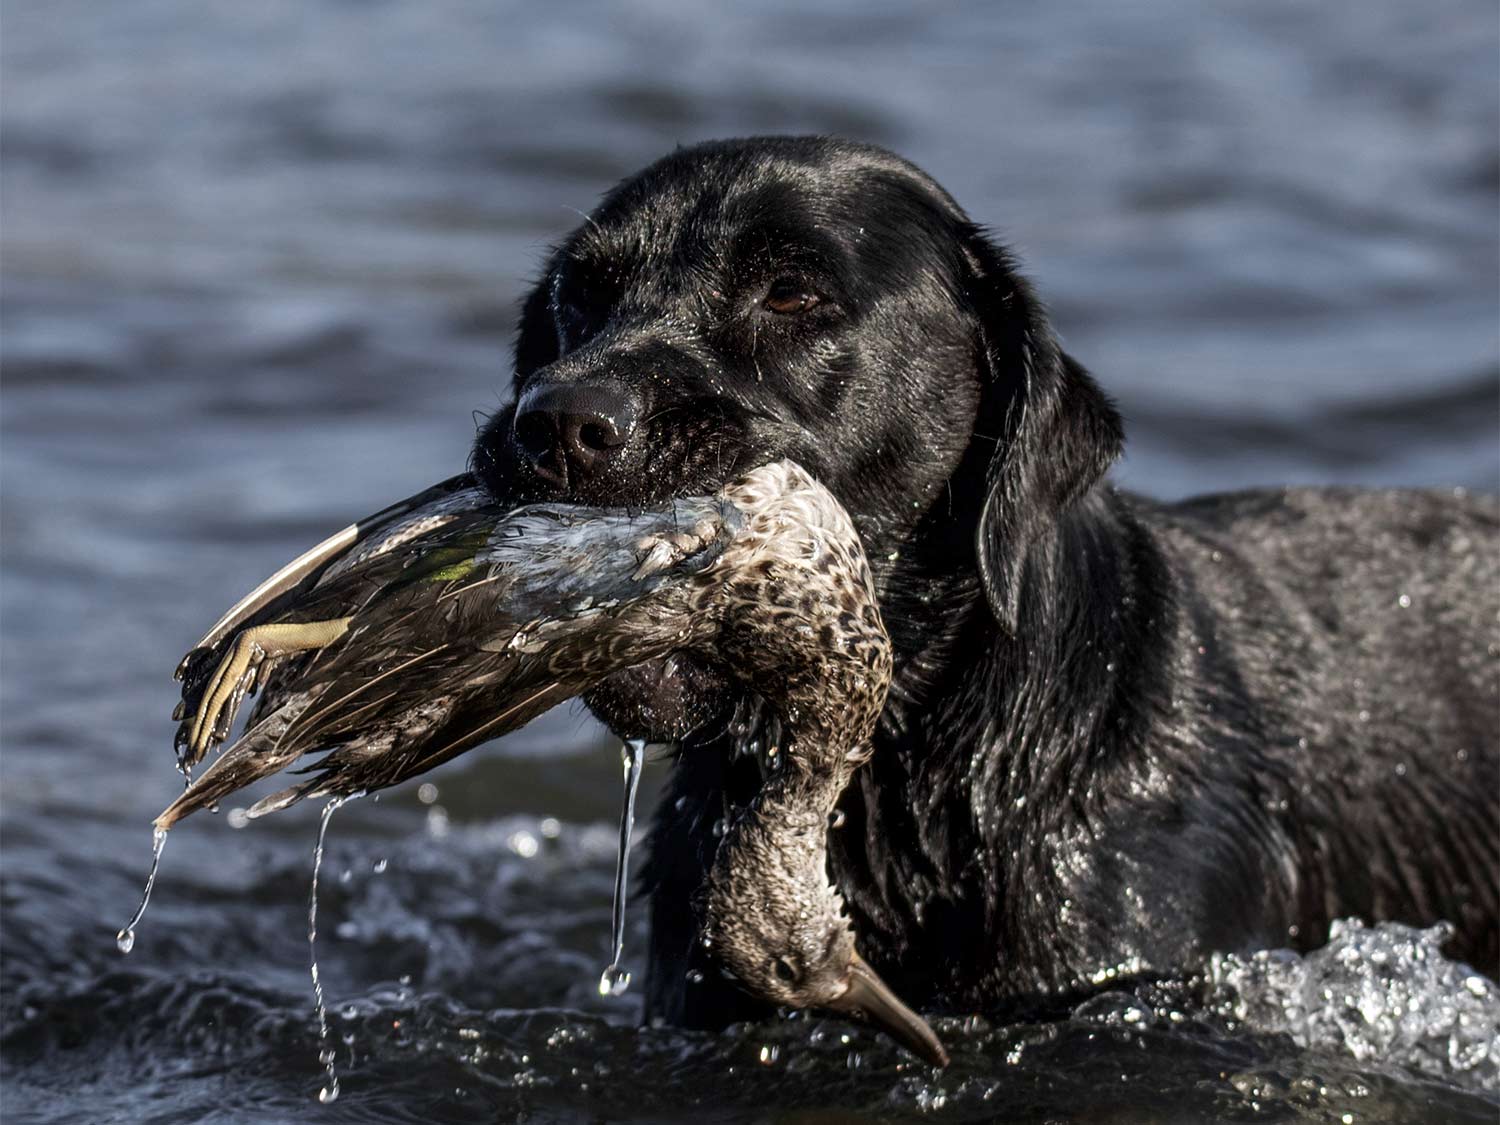 A black labrador retriever with a duck in its mouth.